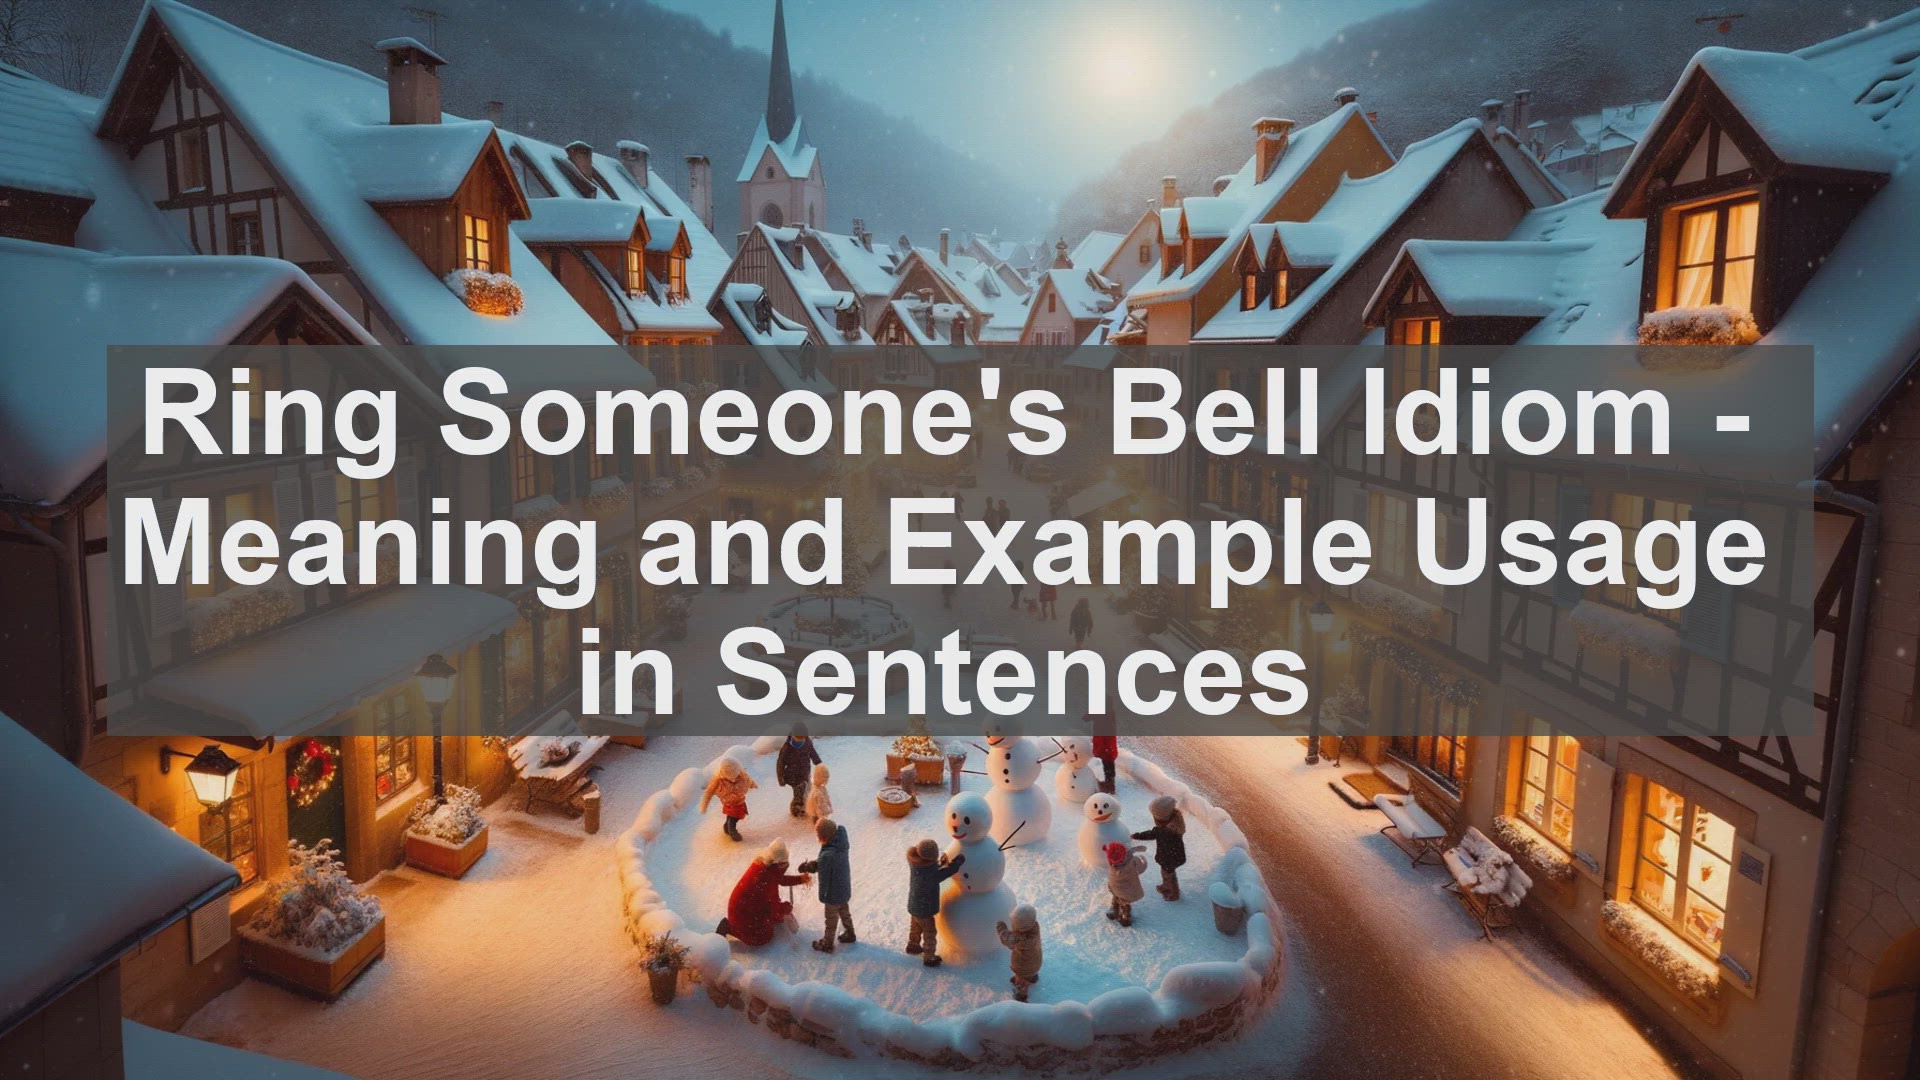 Go English - Idiom of the day: To RING A BELL | Facebook